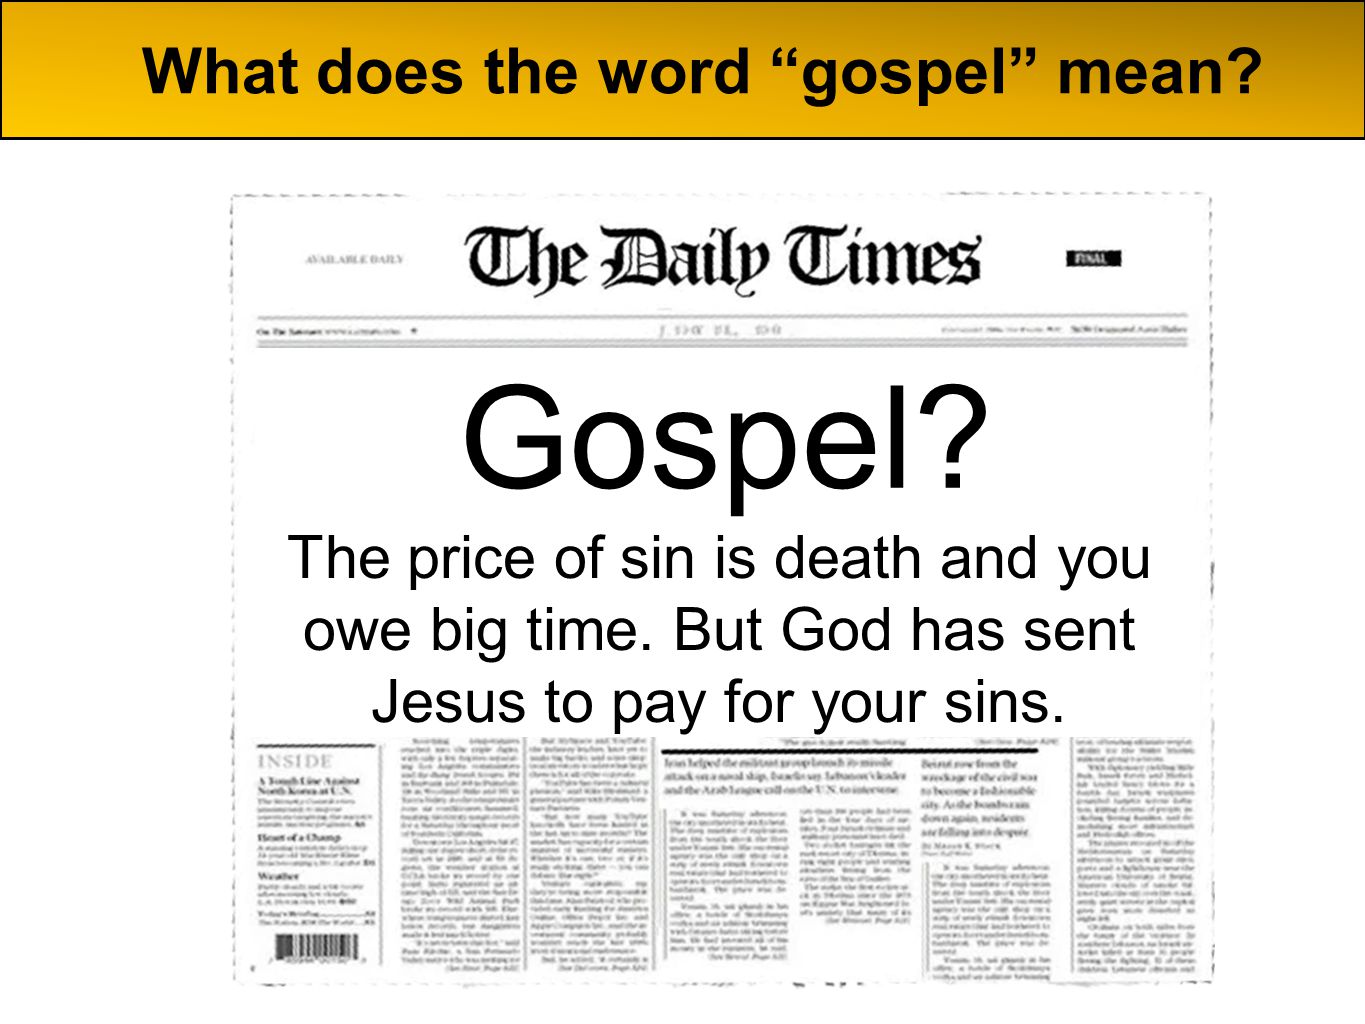 The price of sin is death and you owe big time. But God has sent Jesus to pay for your sins.